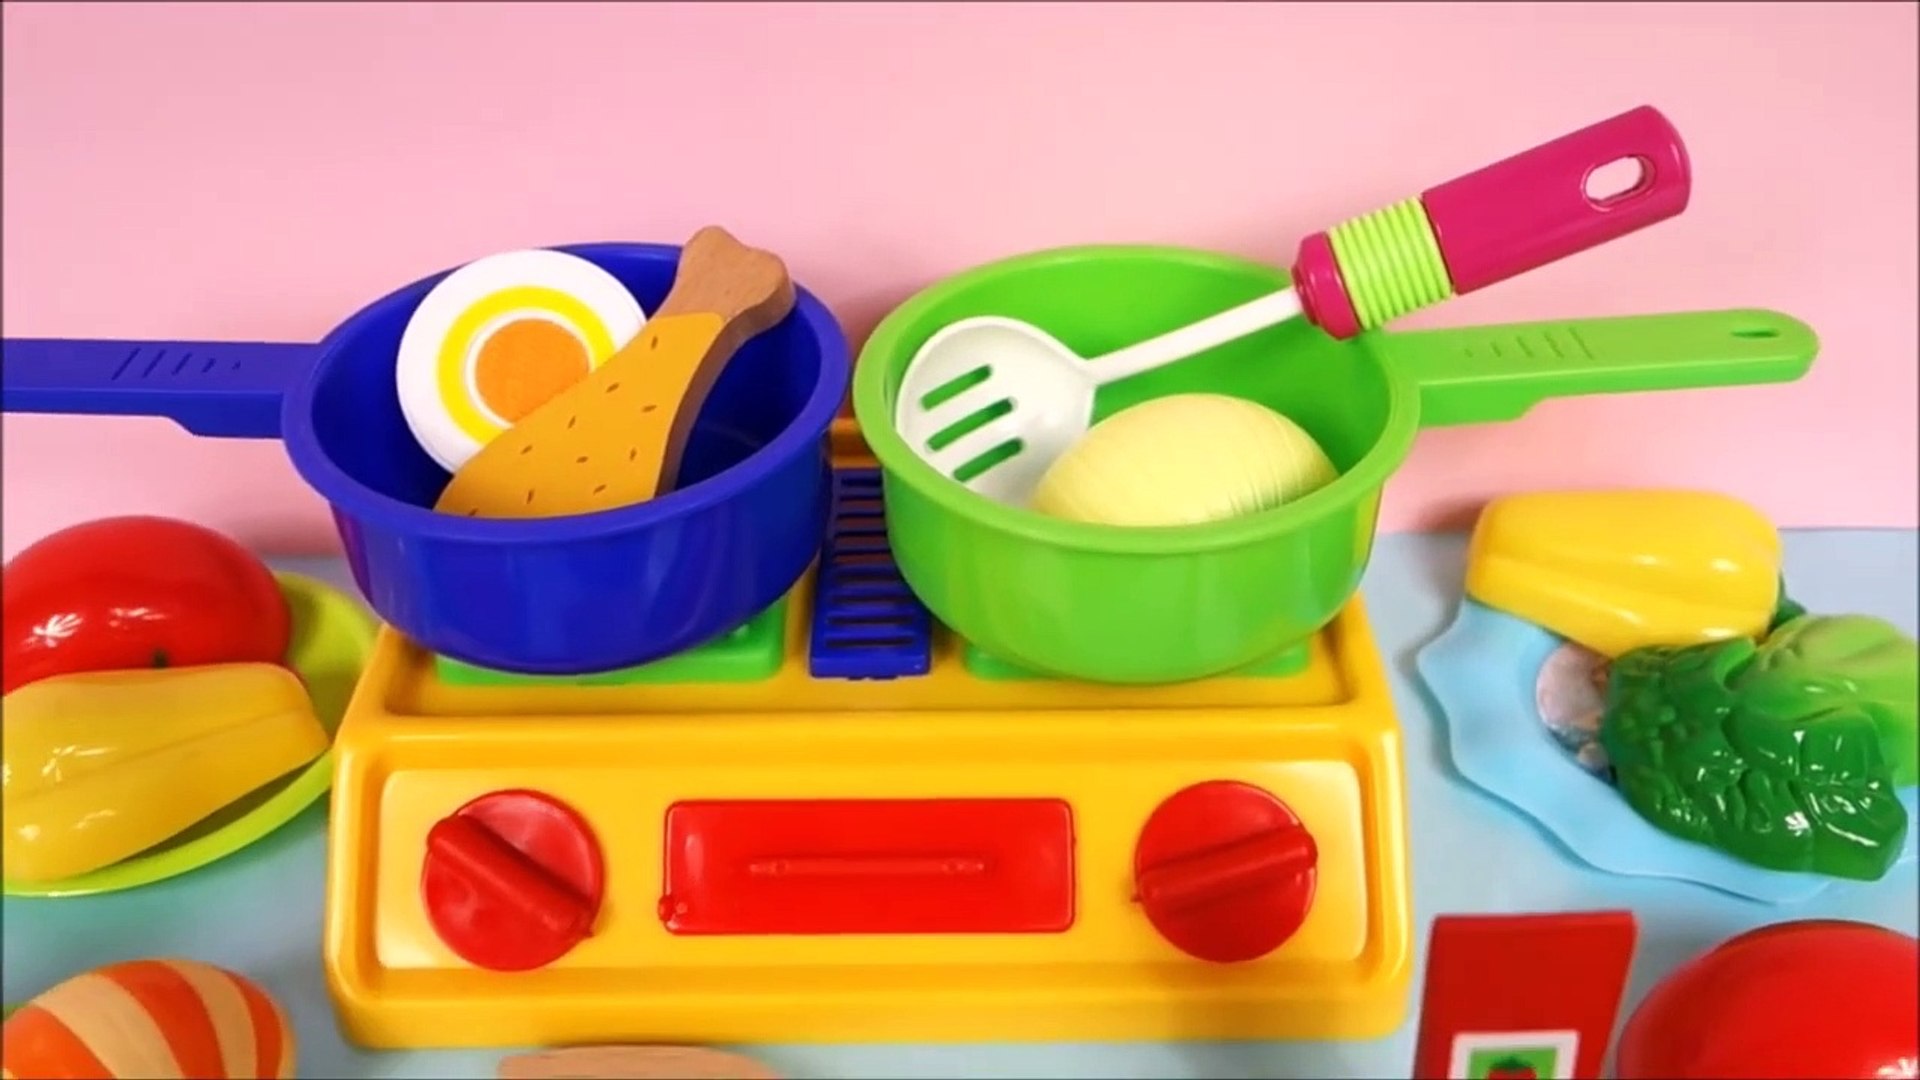 Cooking velcro cutting vegetables and baking toy foods with toy kitchens for kids